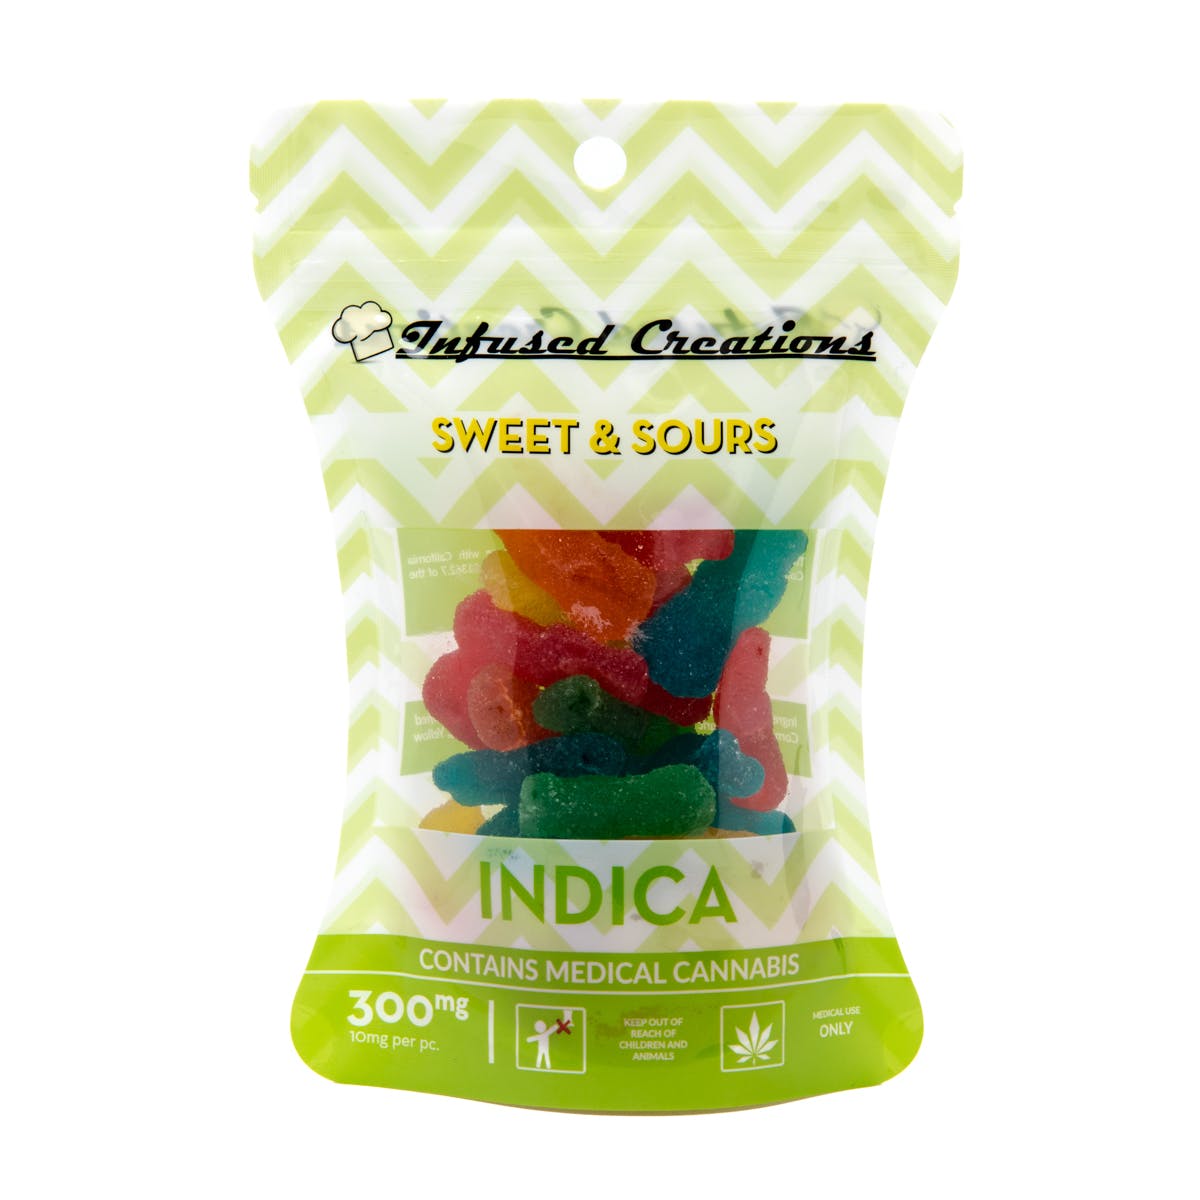 Sweet & Sours indica, 300mg